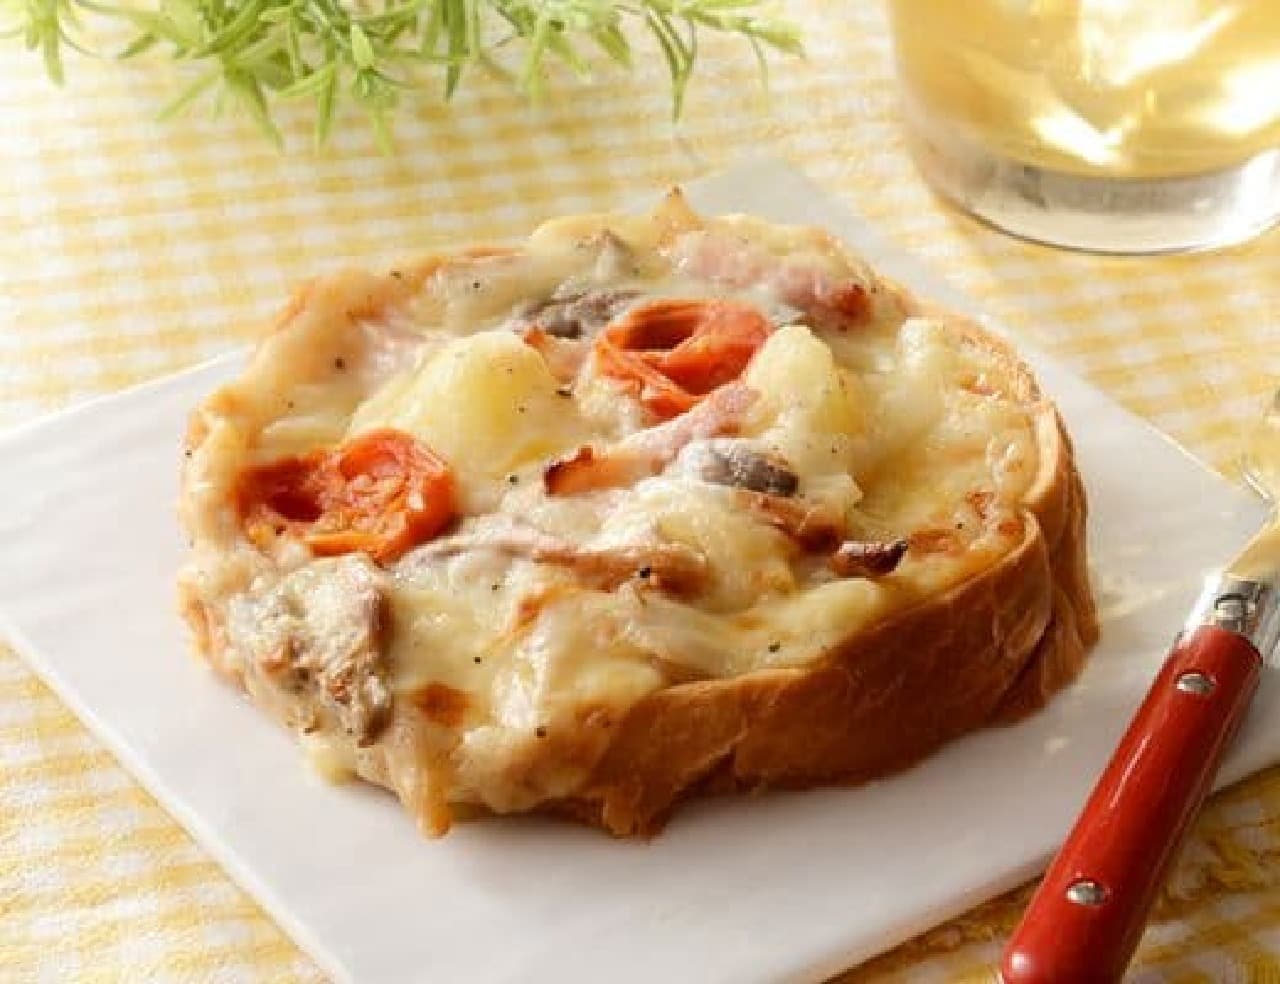 Lawson "Open Sandwich with 6 kinds of cheese and vegetables"